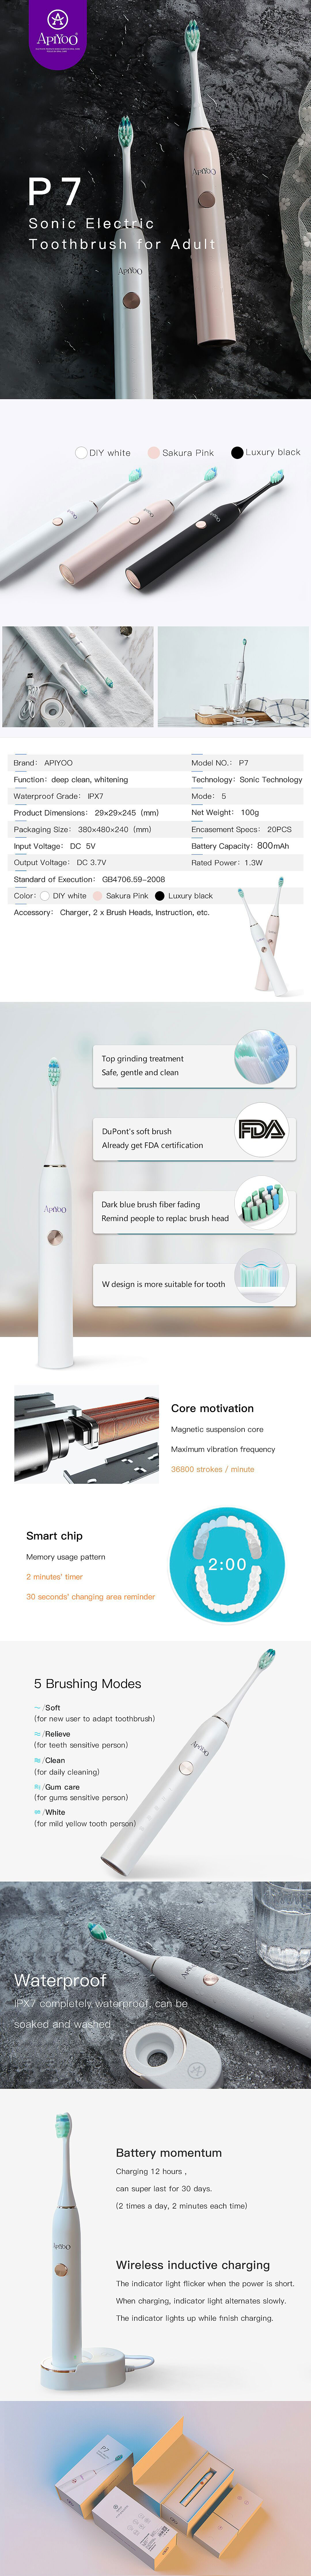 APIYOO-P7-Sonic-Electric-Toothbrush-Five-Cleaning-Modes-Time-Reminder-Electric-Toothbrush-IPX7-Water-1943416-1